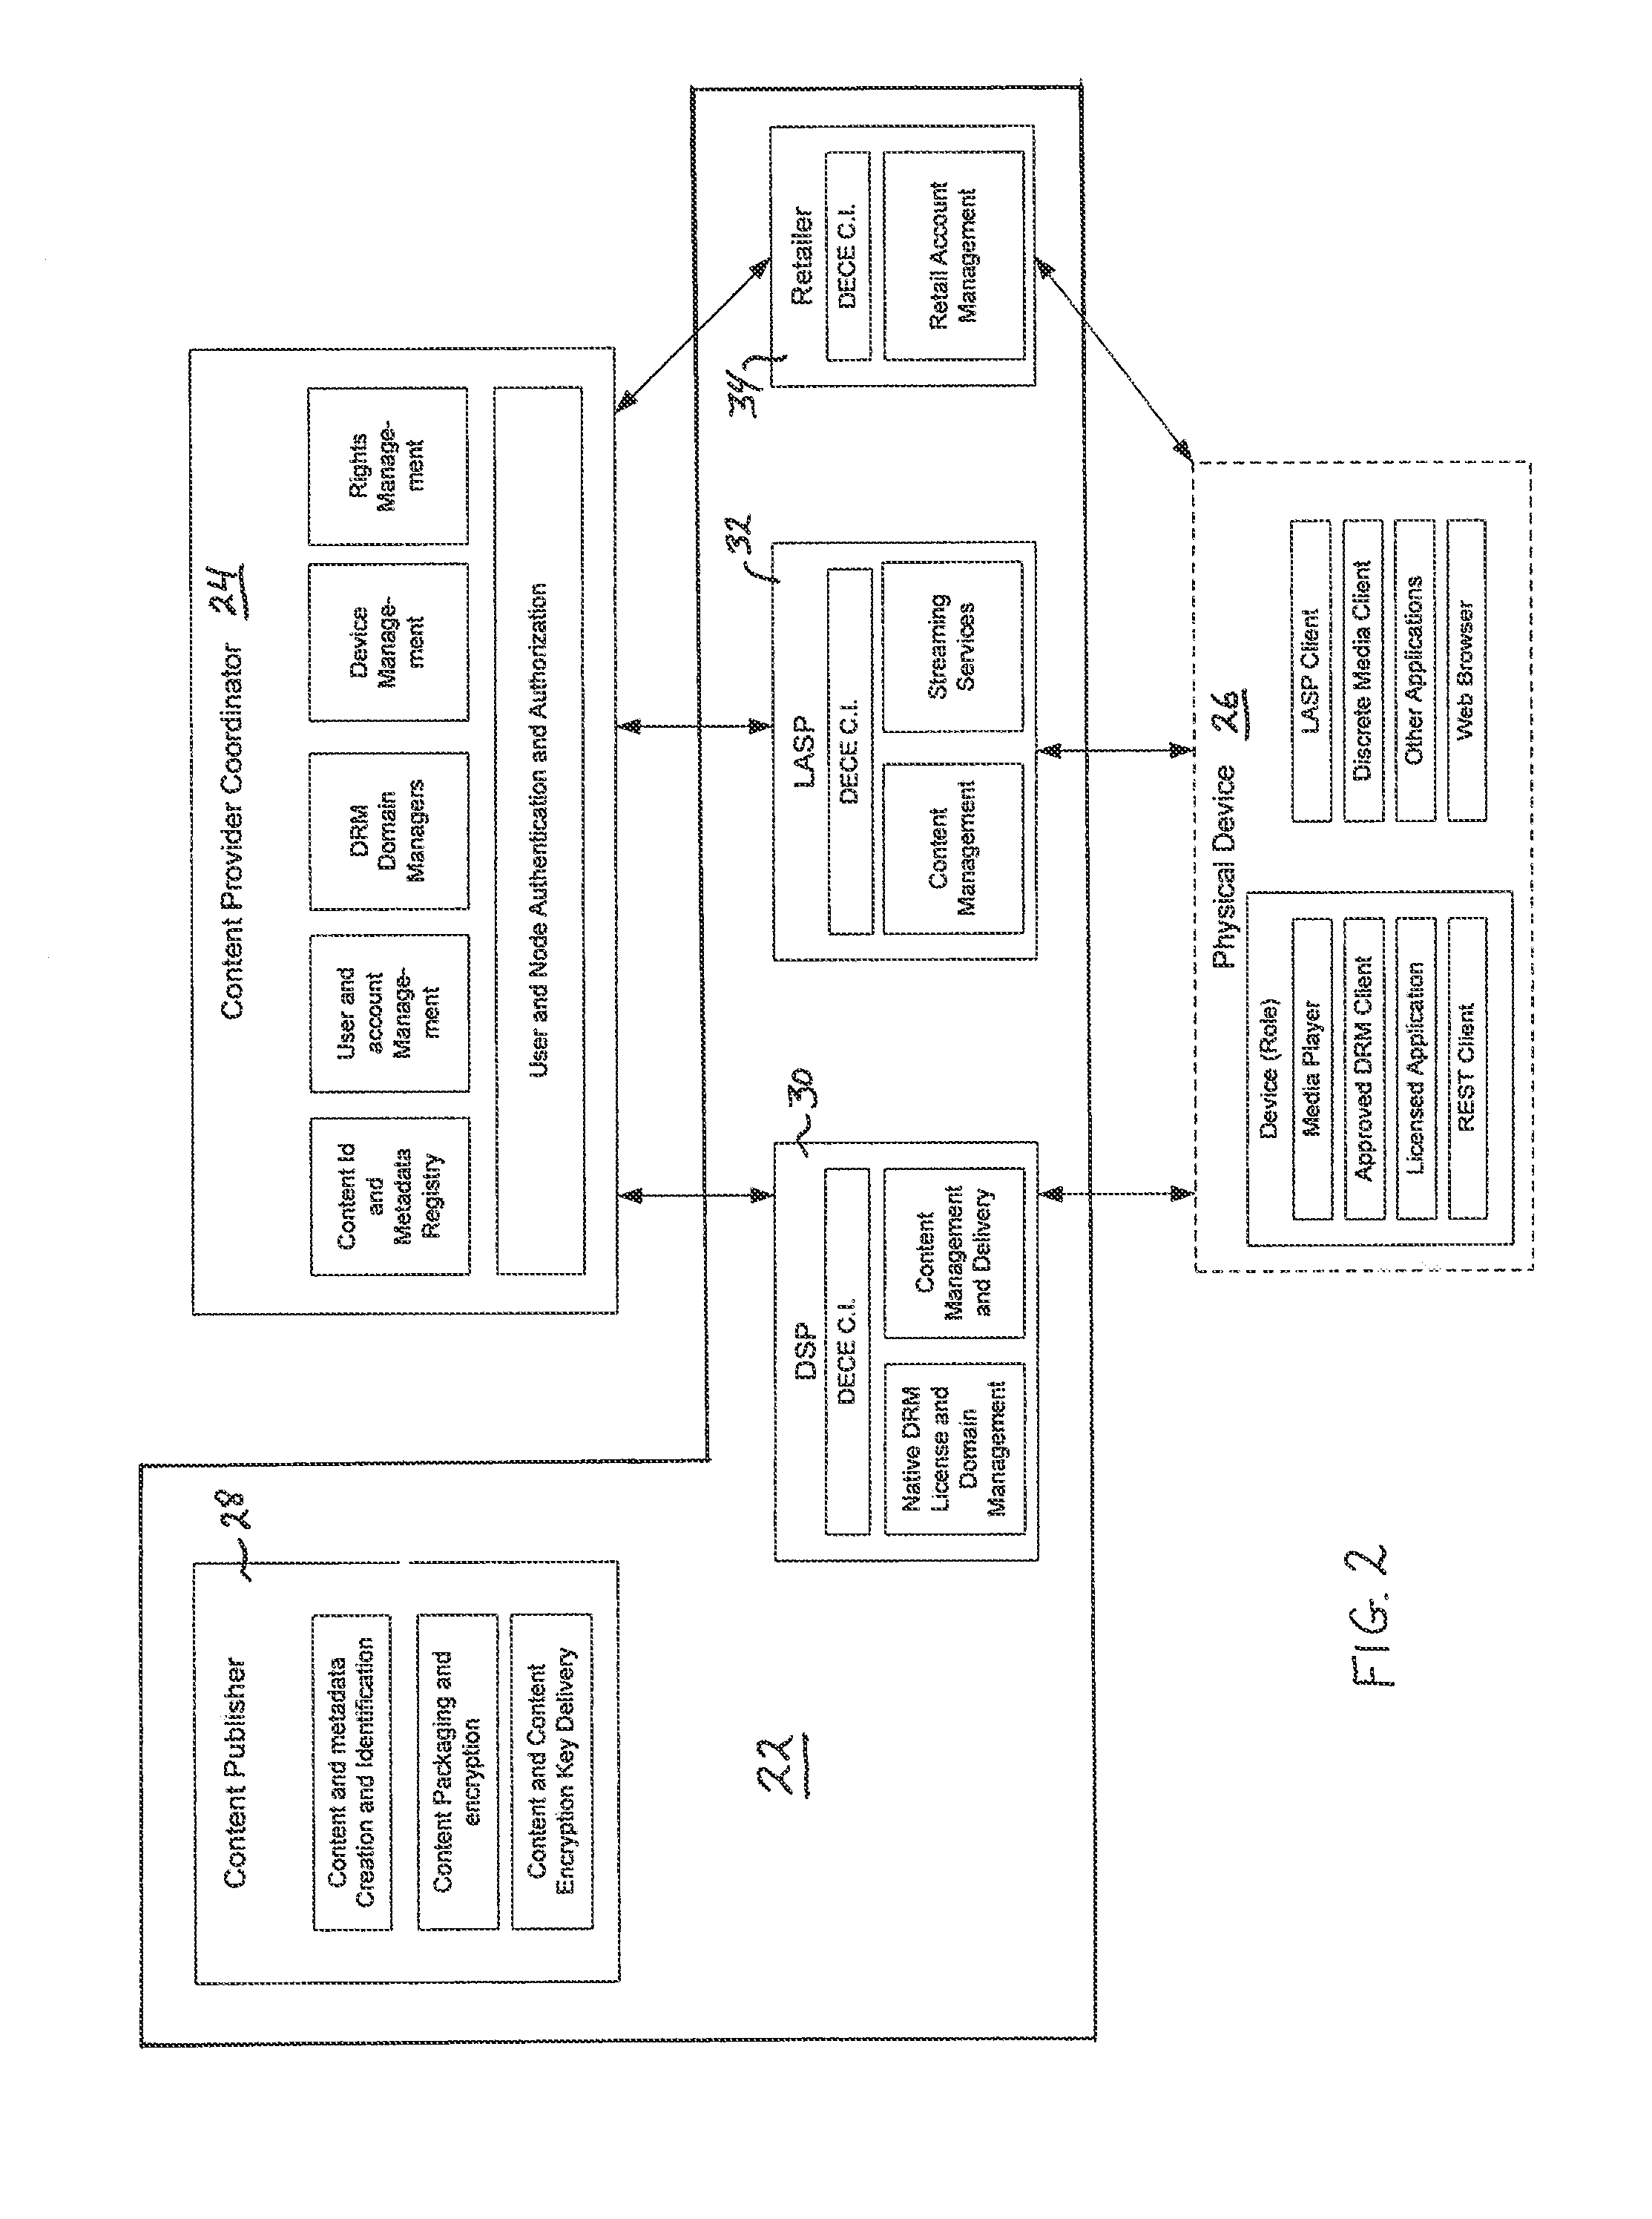 Method for media content delivery using video and/or audio on demand assets